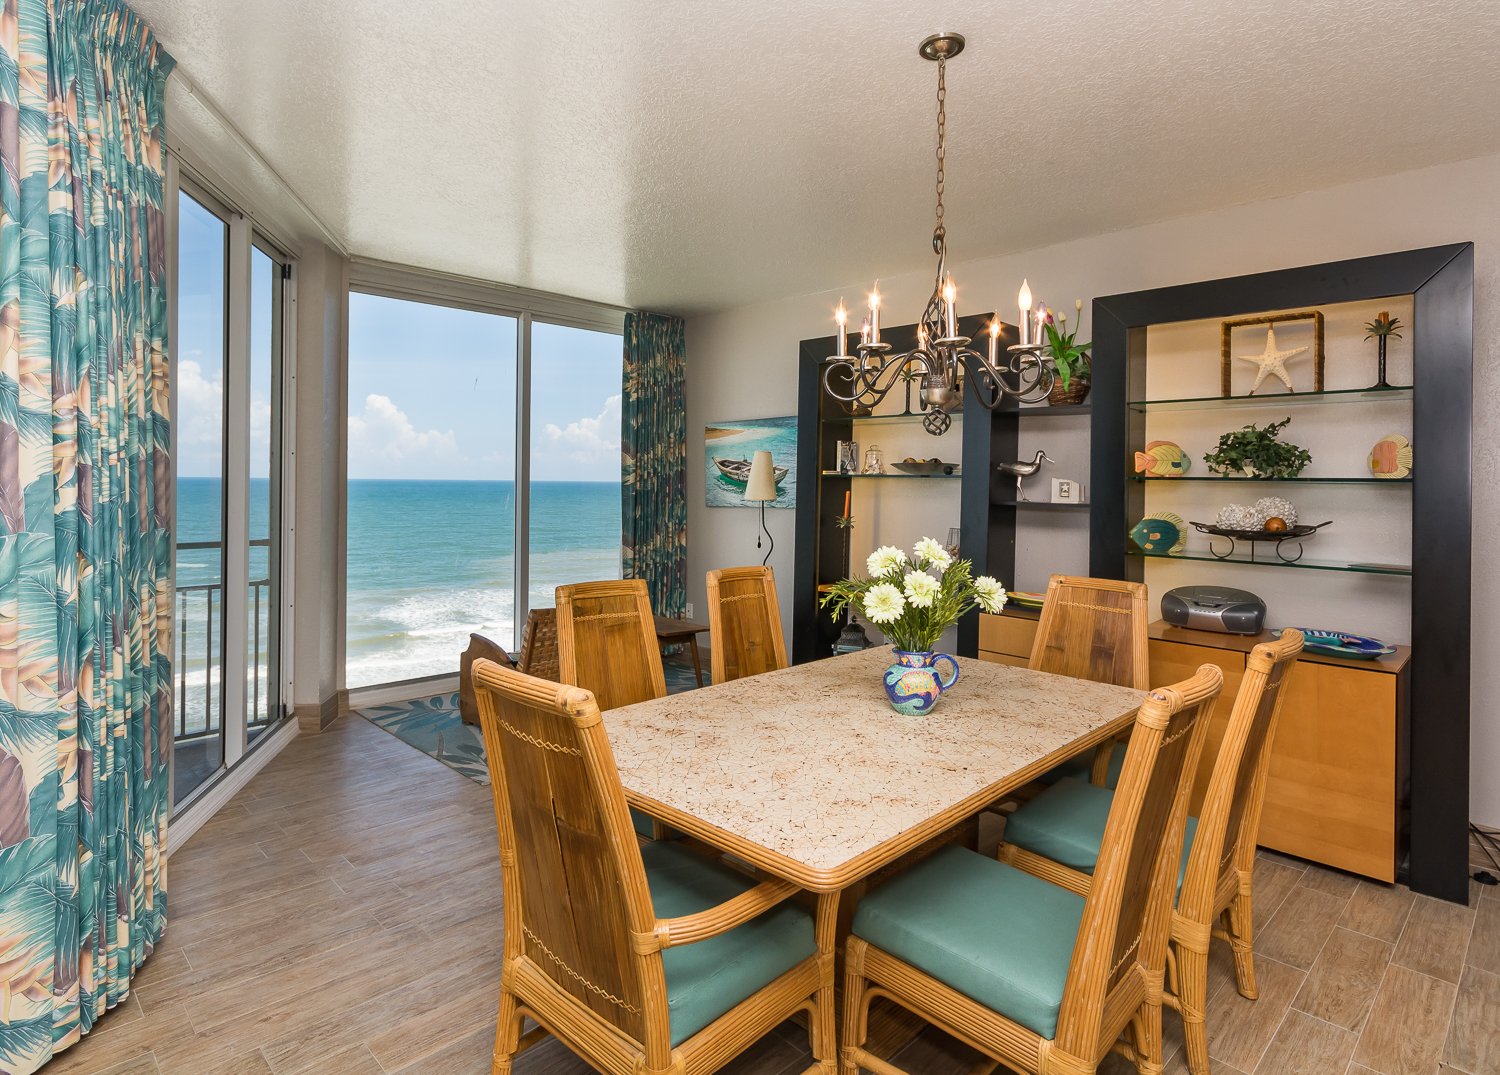 Enjoy meals by the ocean side in the oceanfront living room with seating for 6.